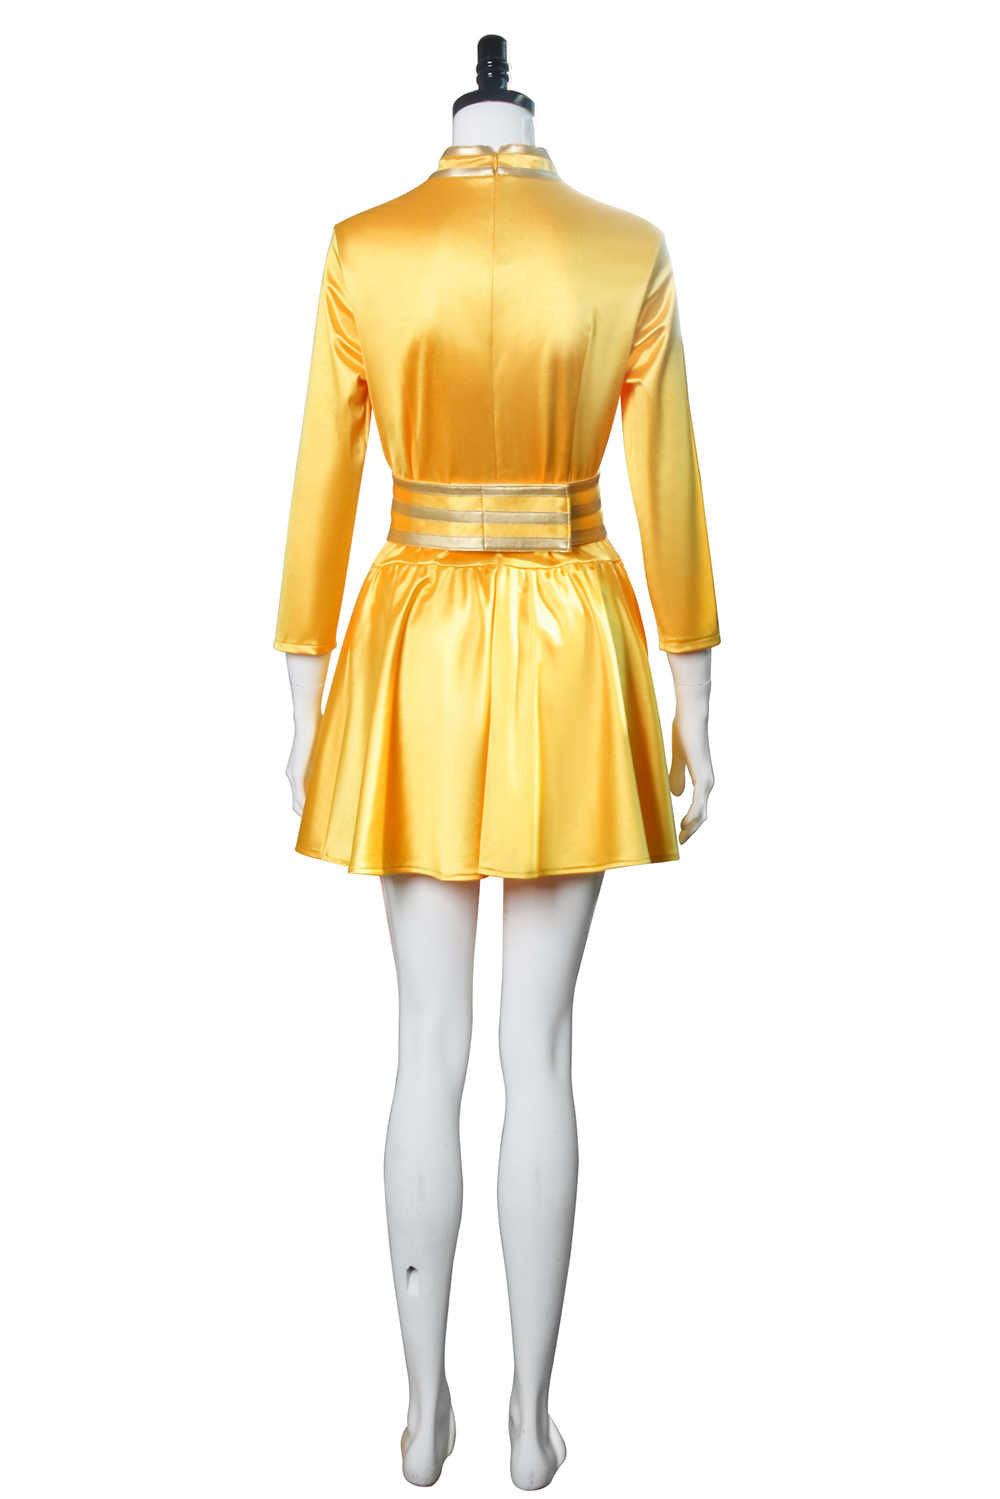 Movie White Christmas Betty Haynes Costumes Yellow Dancing Dress with Shorts Long Sleeve Vestidos Woman Xmas Party Prom Clothing-Takerlama